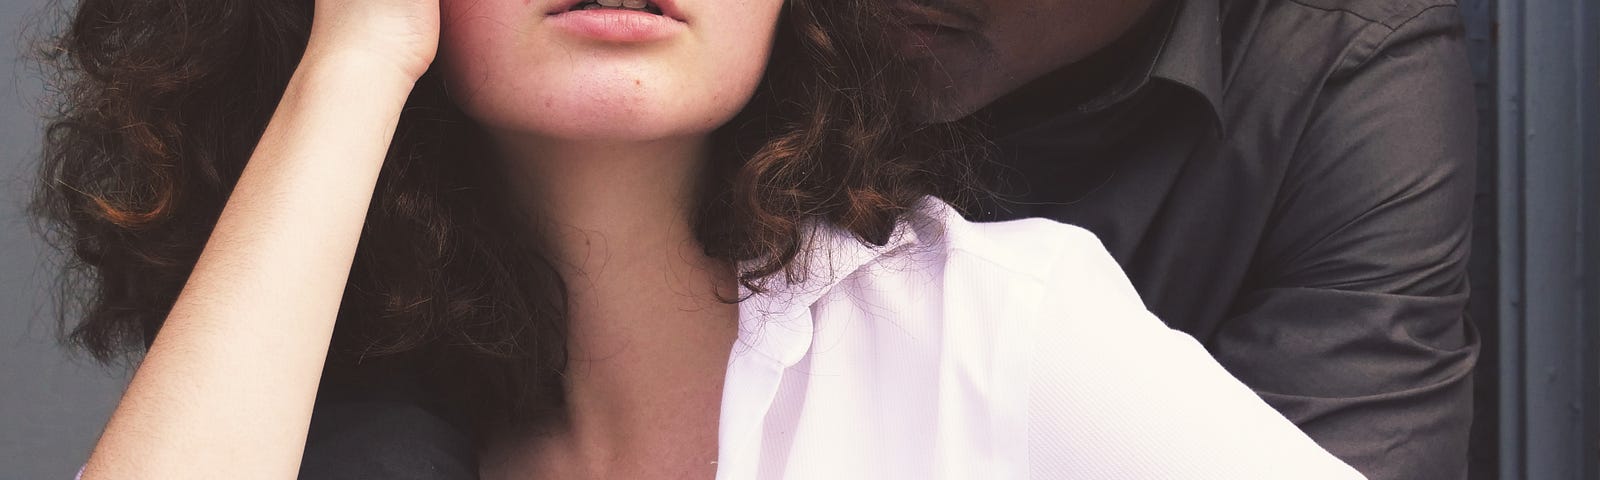 Woman in a white shirt, embraced by her partner